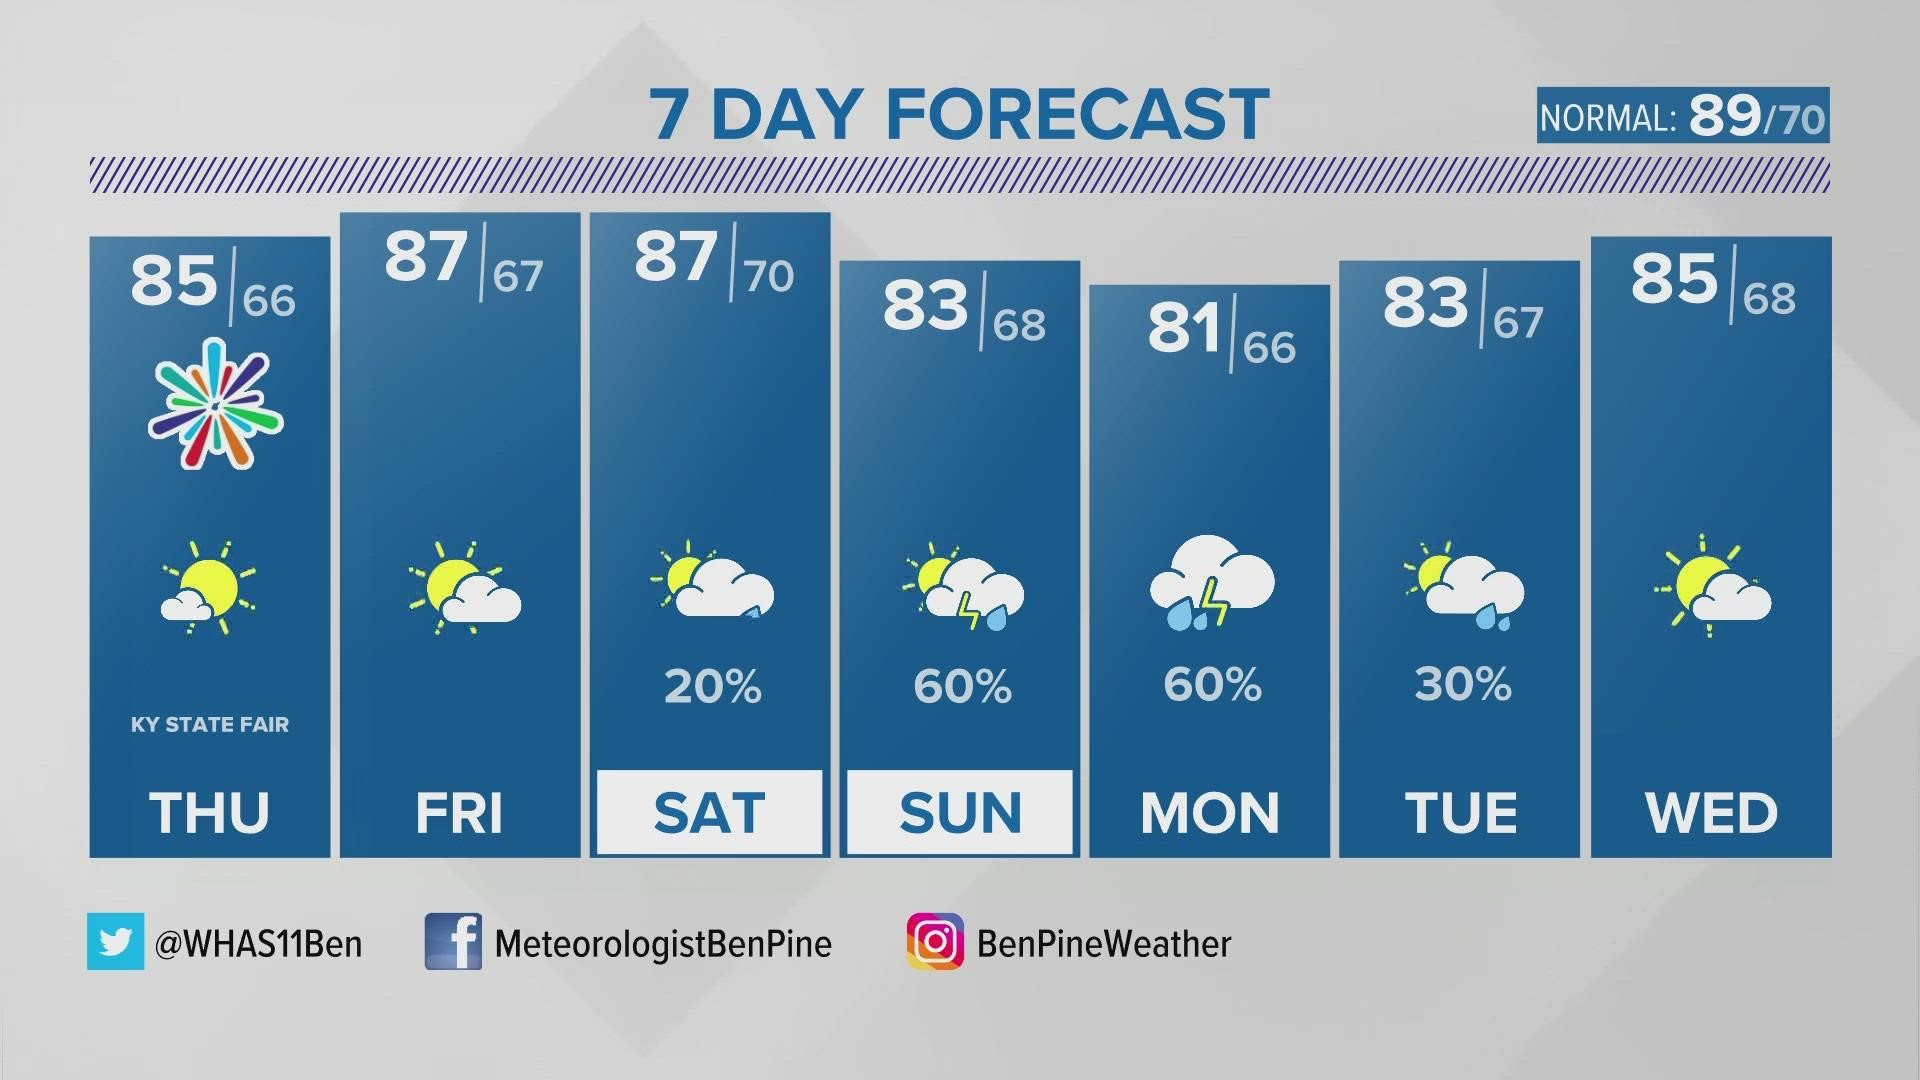 We'll stay dry through Friday, but rain chances increase starting Sunday.